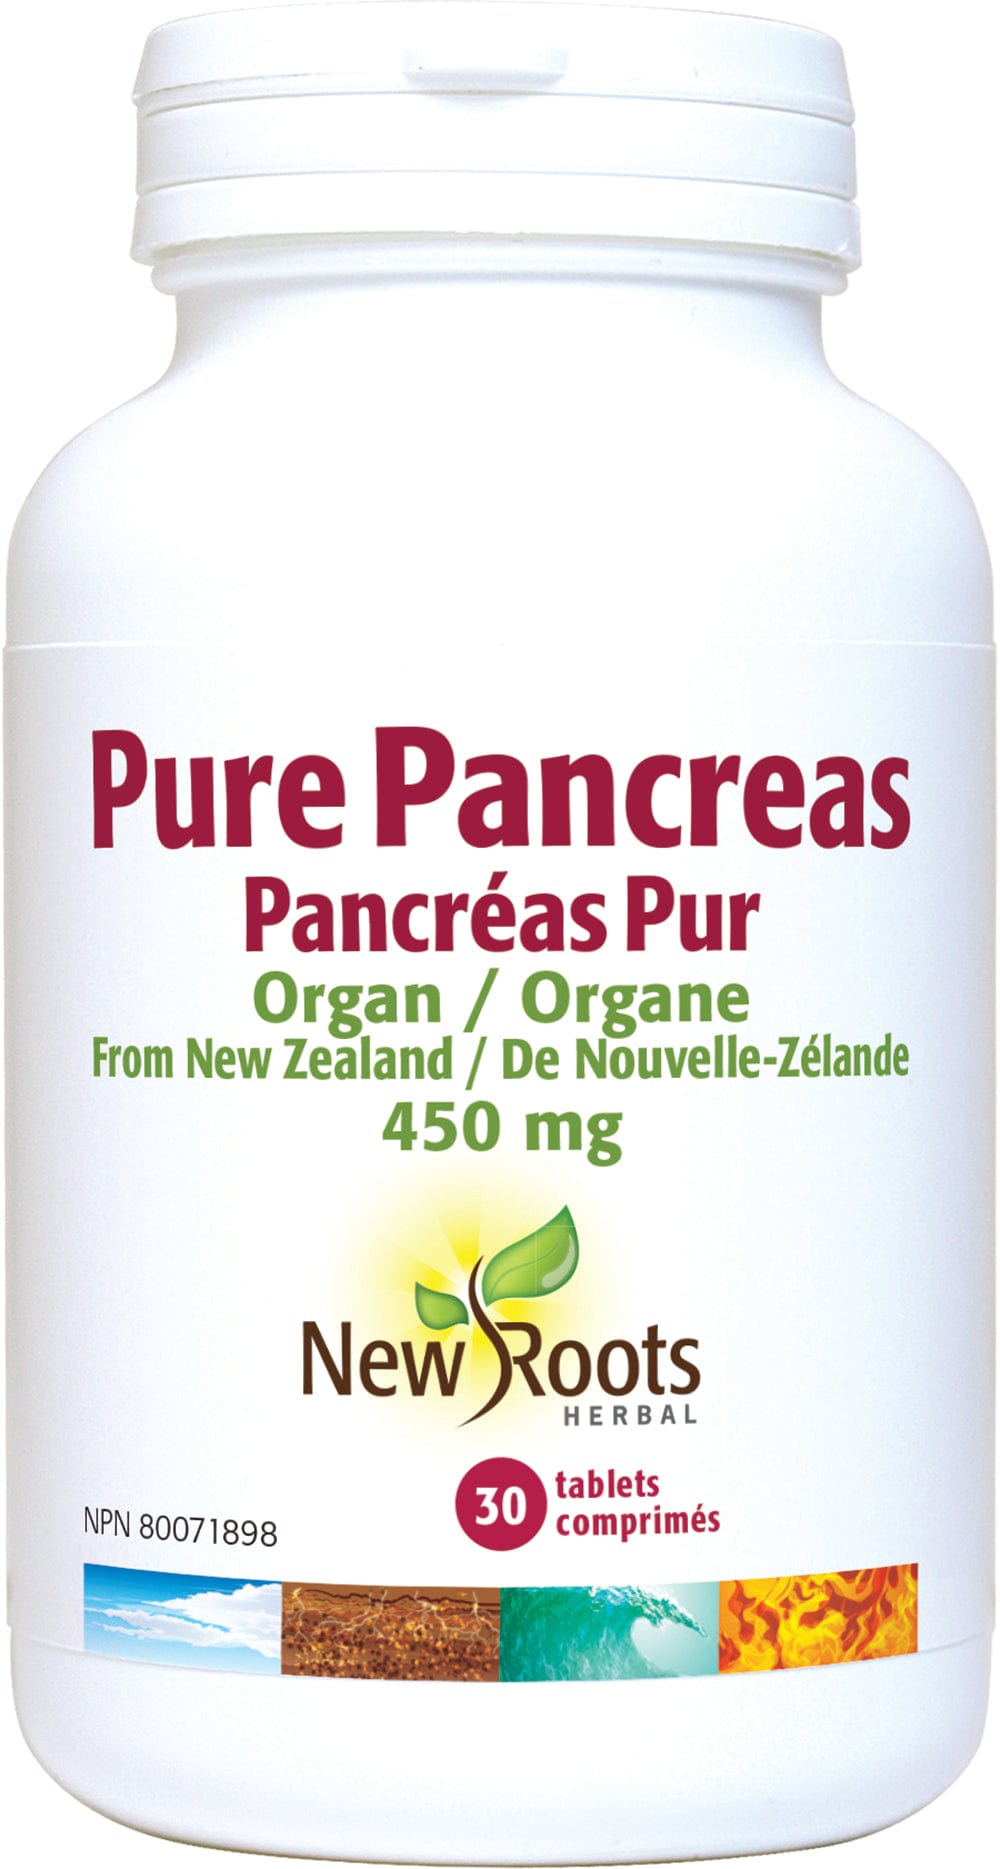 NEW ROOTS HERBAL Suppléments Pure pancreas 450mg 30caps